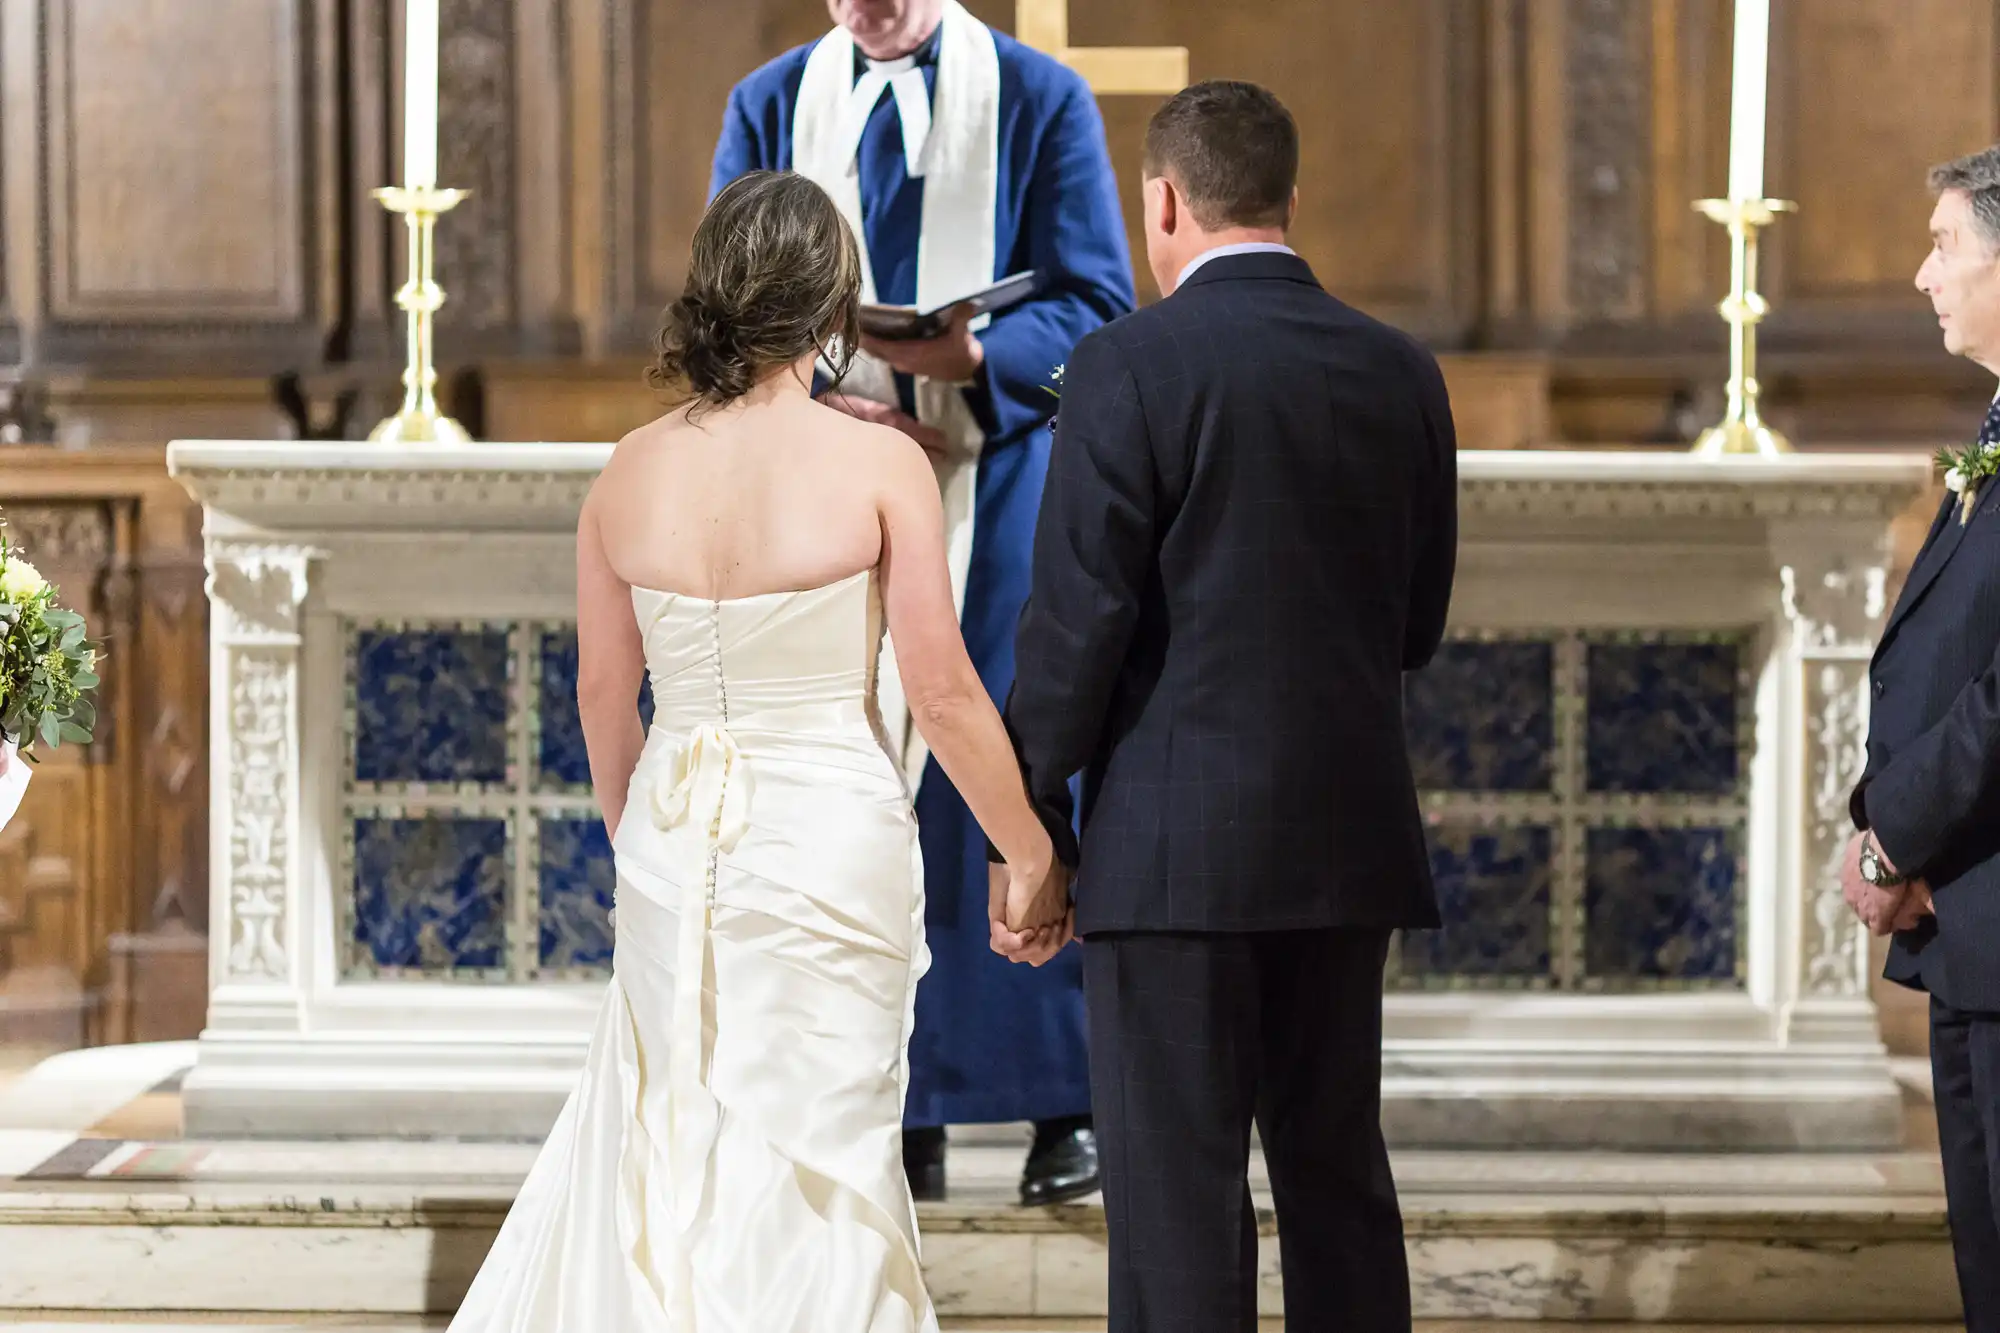 A bride and groom holding hands during a wedding ceremony in a church, with the officiant in front of them and floral decorations on the sides.